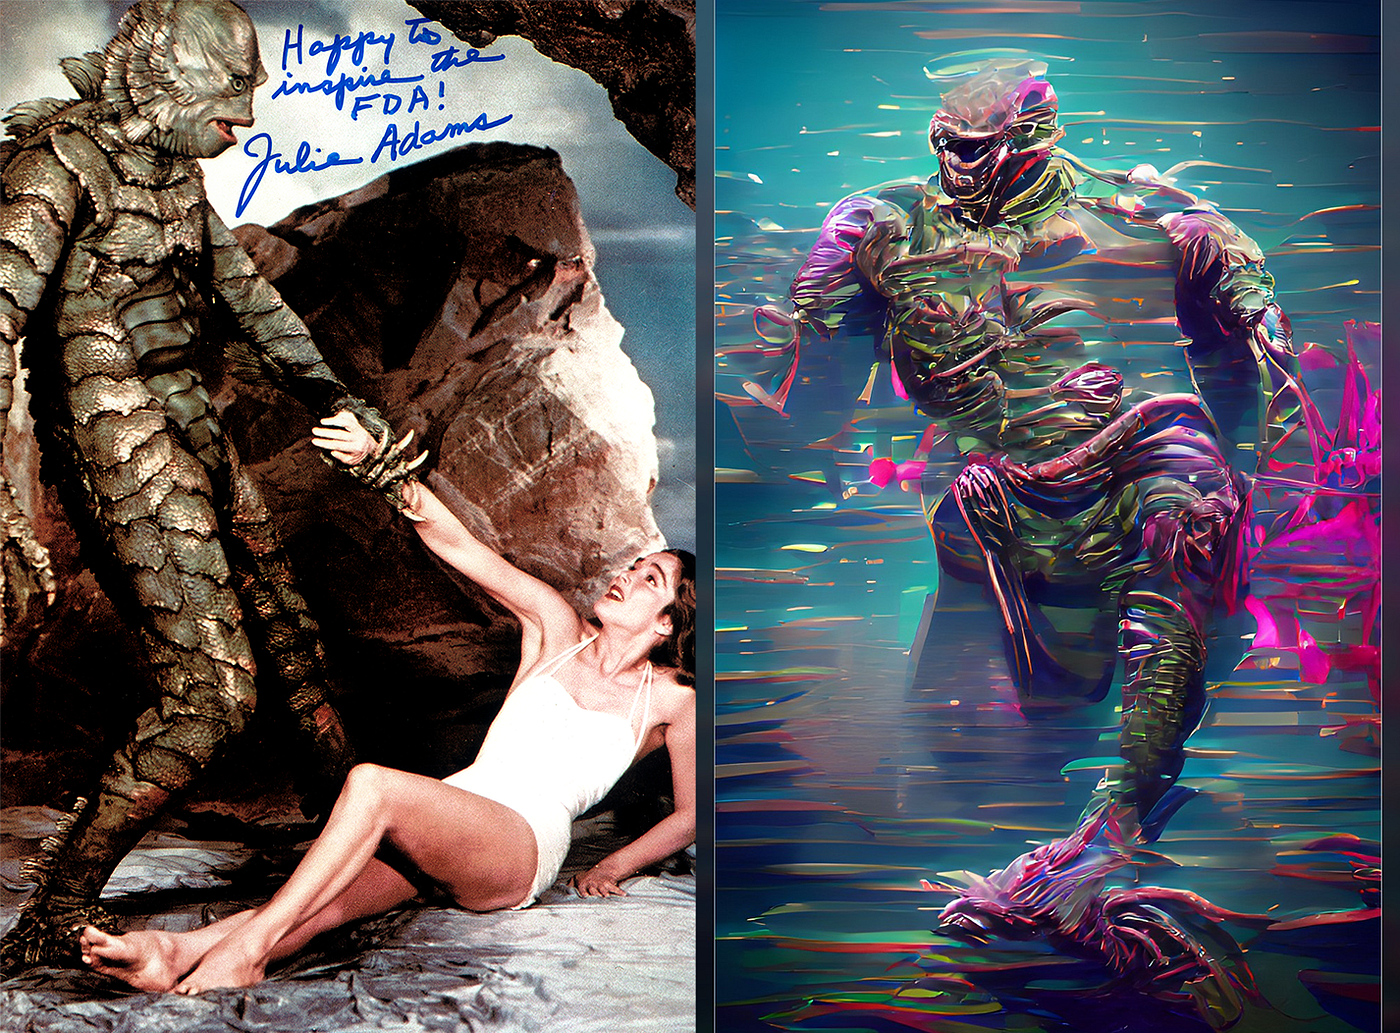 Comparison between a real picture of the Creature from the Black Lagoon and the AI-generated version